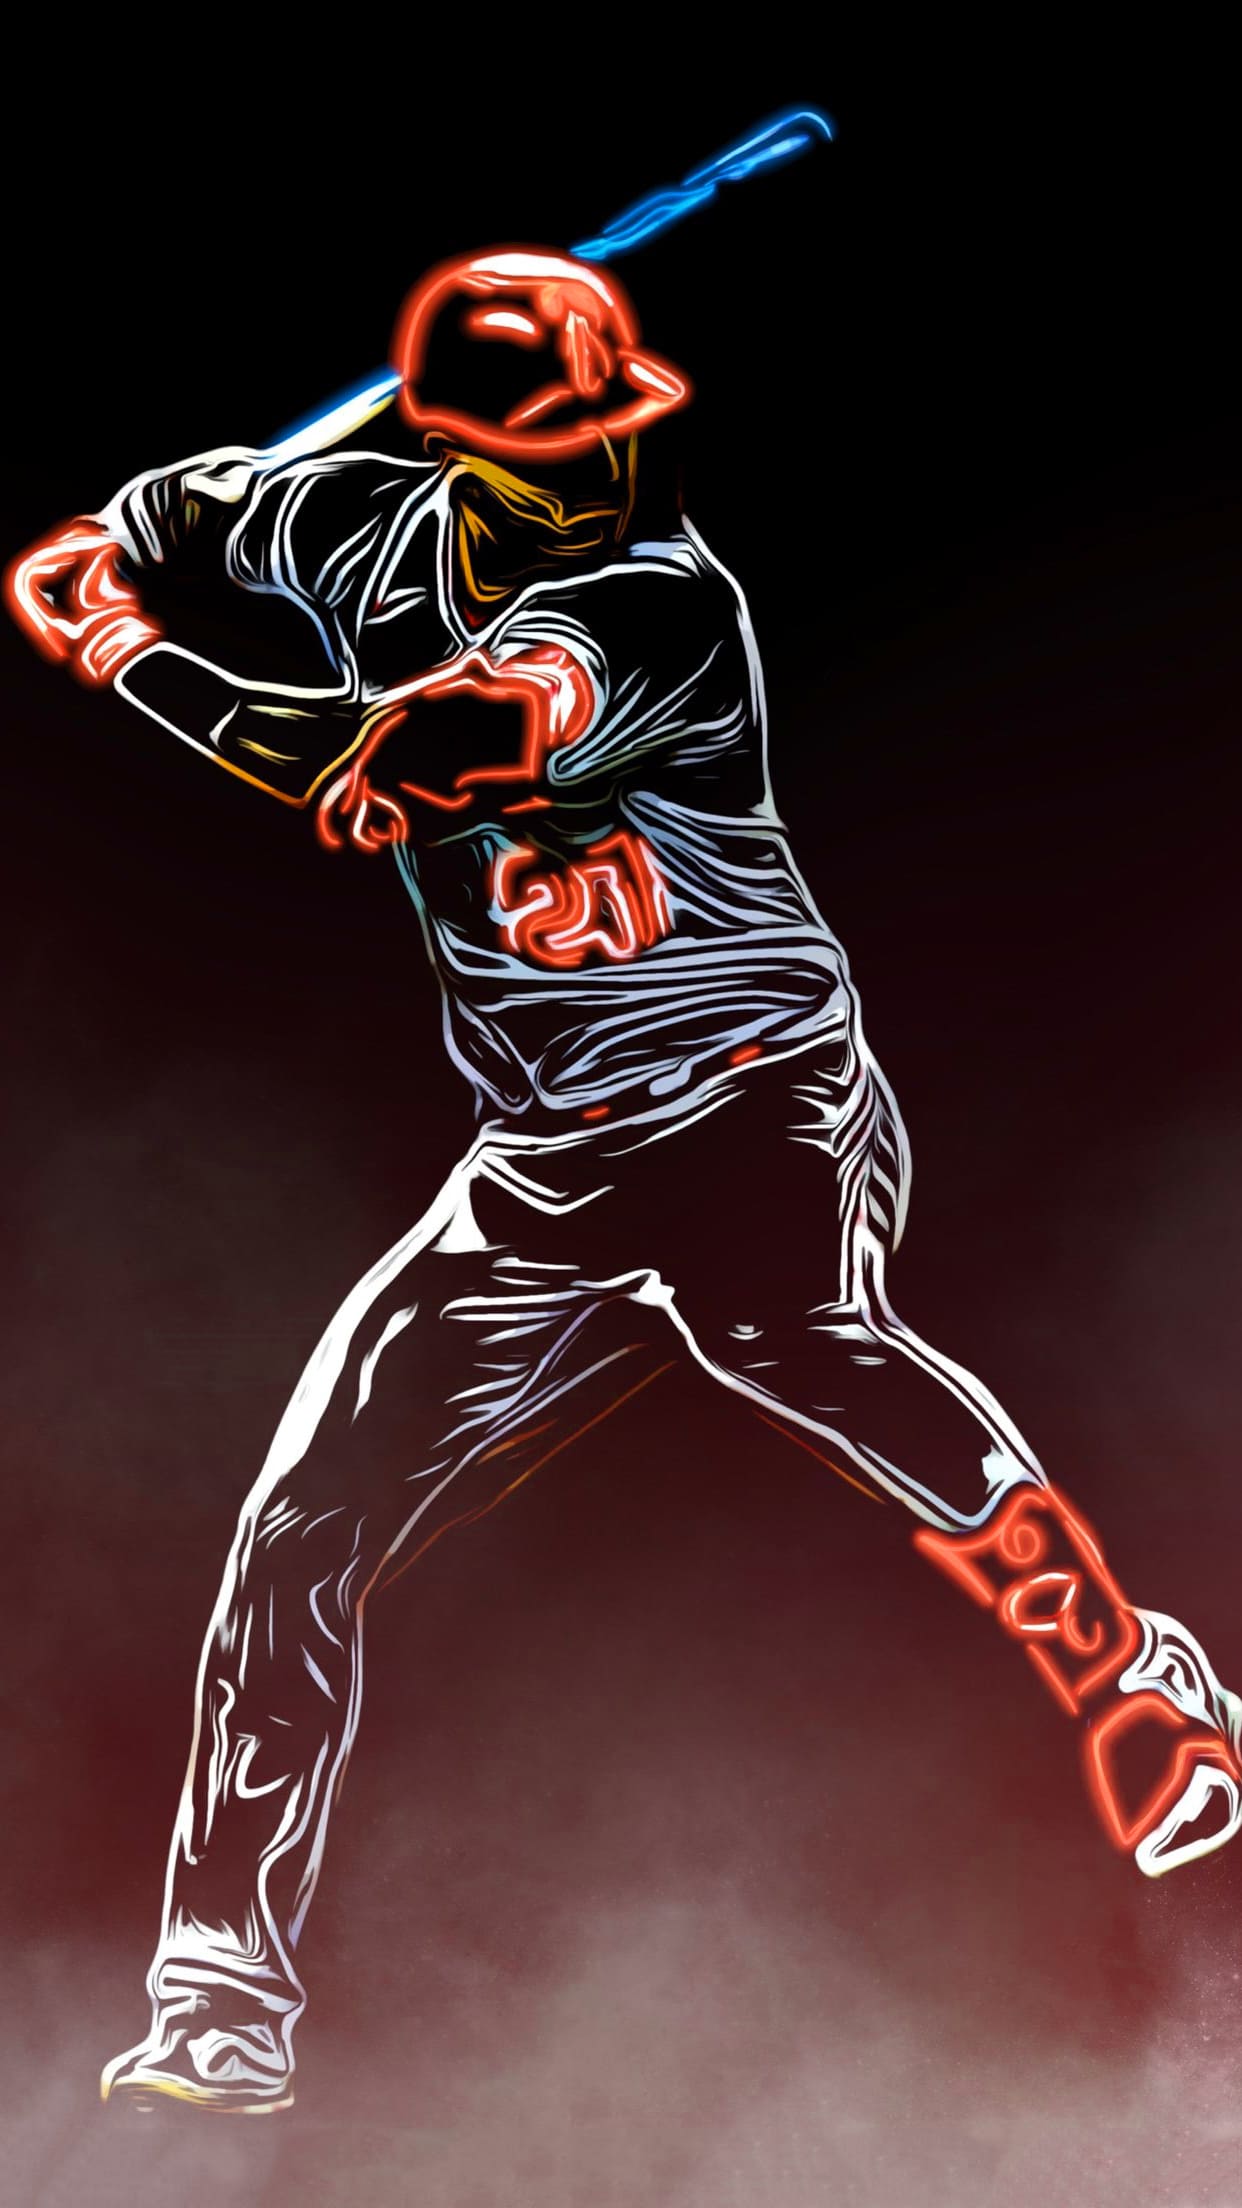 Mike Trout Wallpaper  NawPic